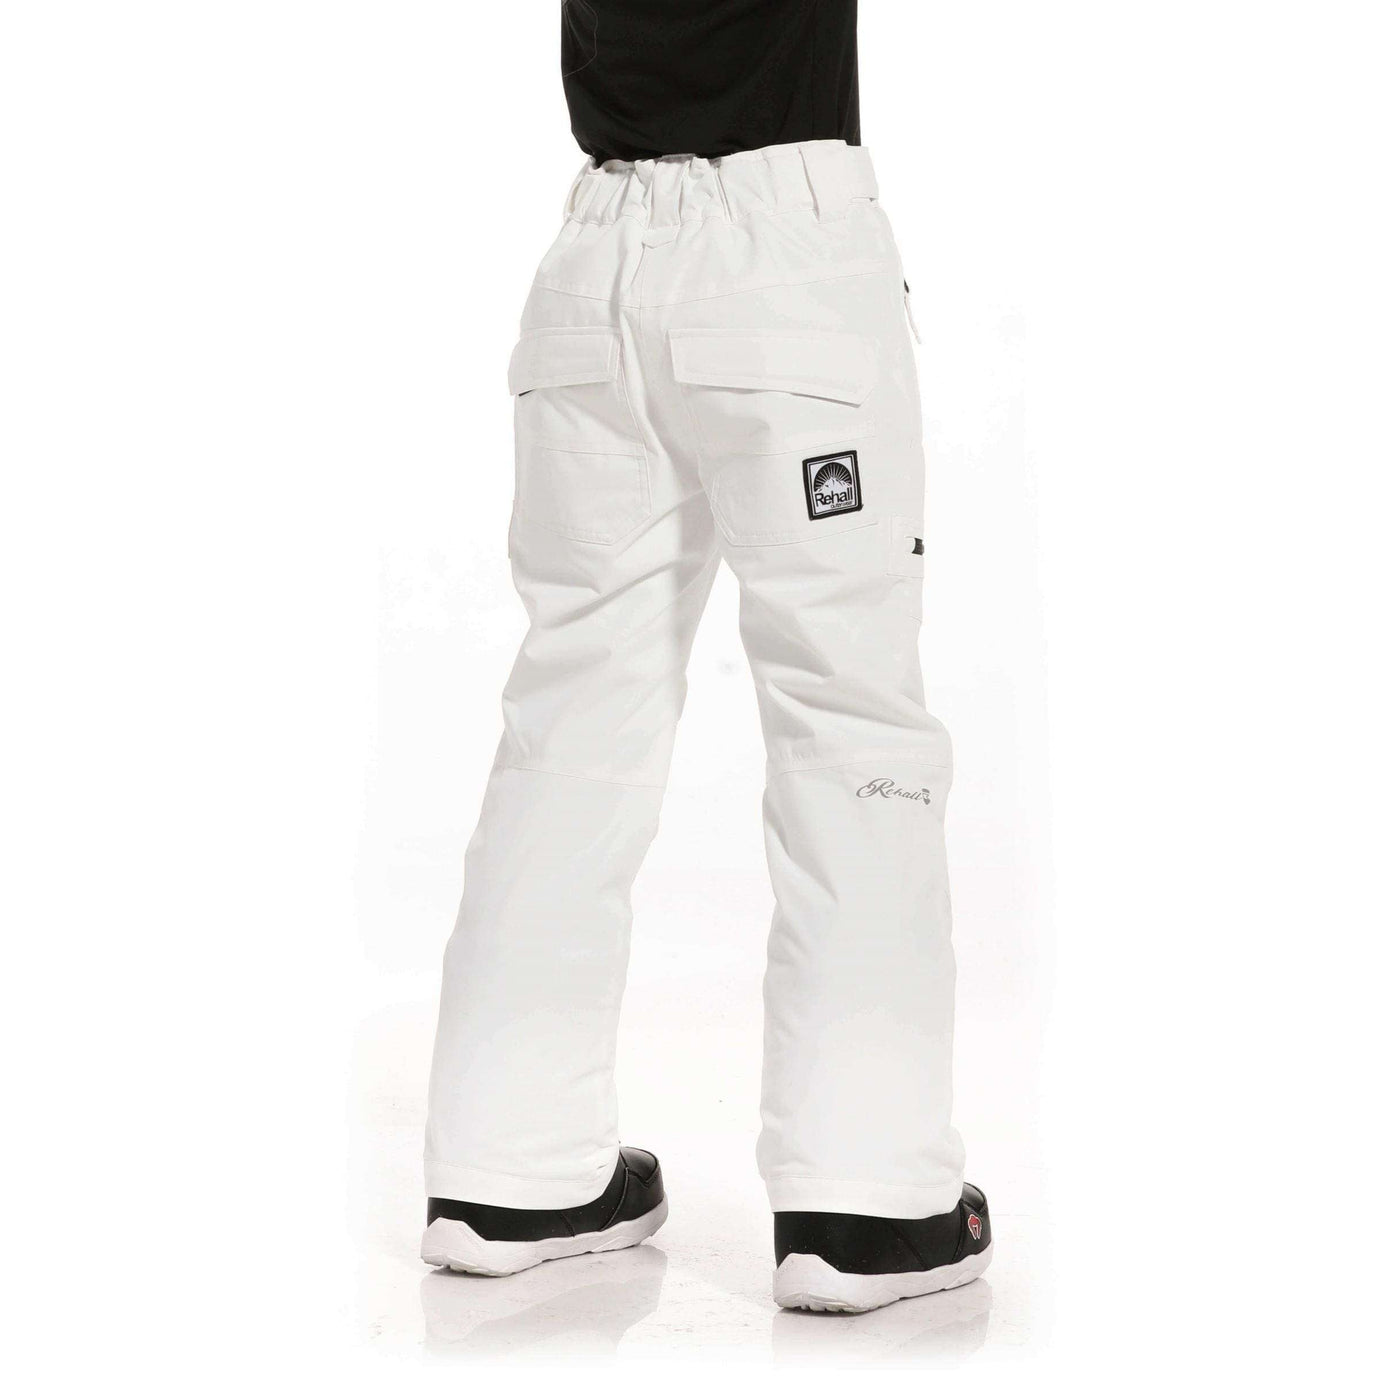 Rehall Outerwear Pants Rehall Keely Girls Snow Pants - White